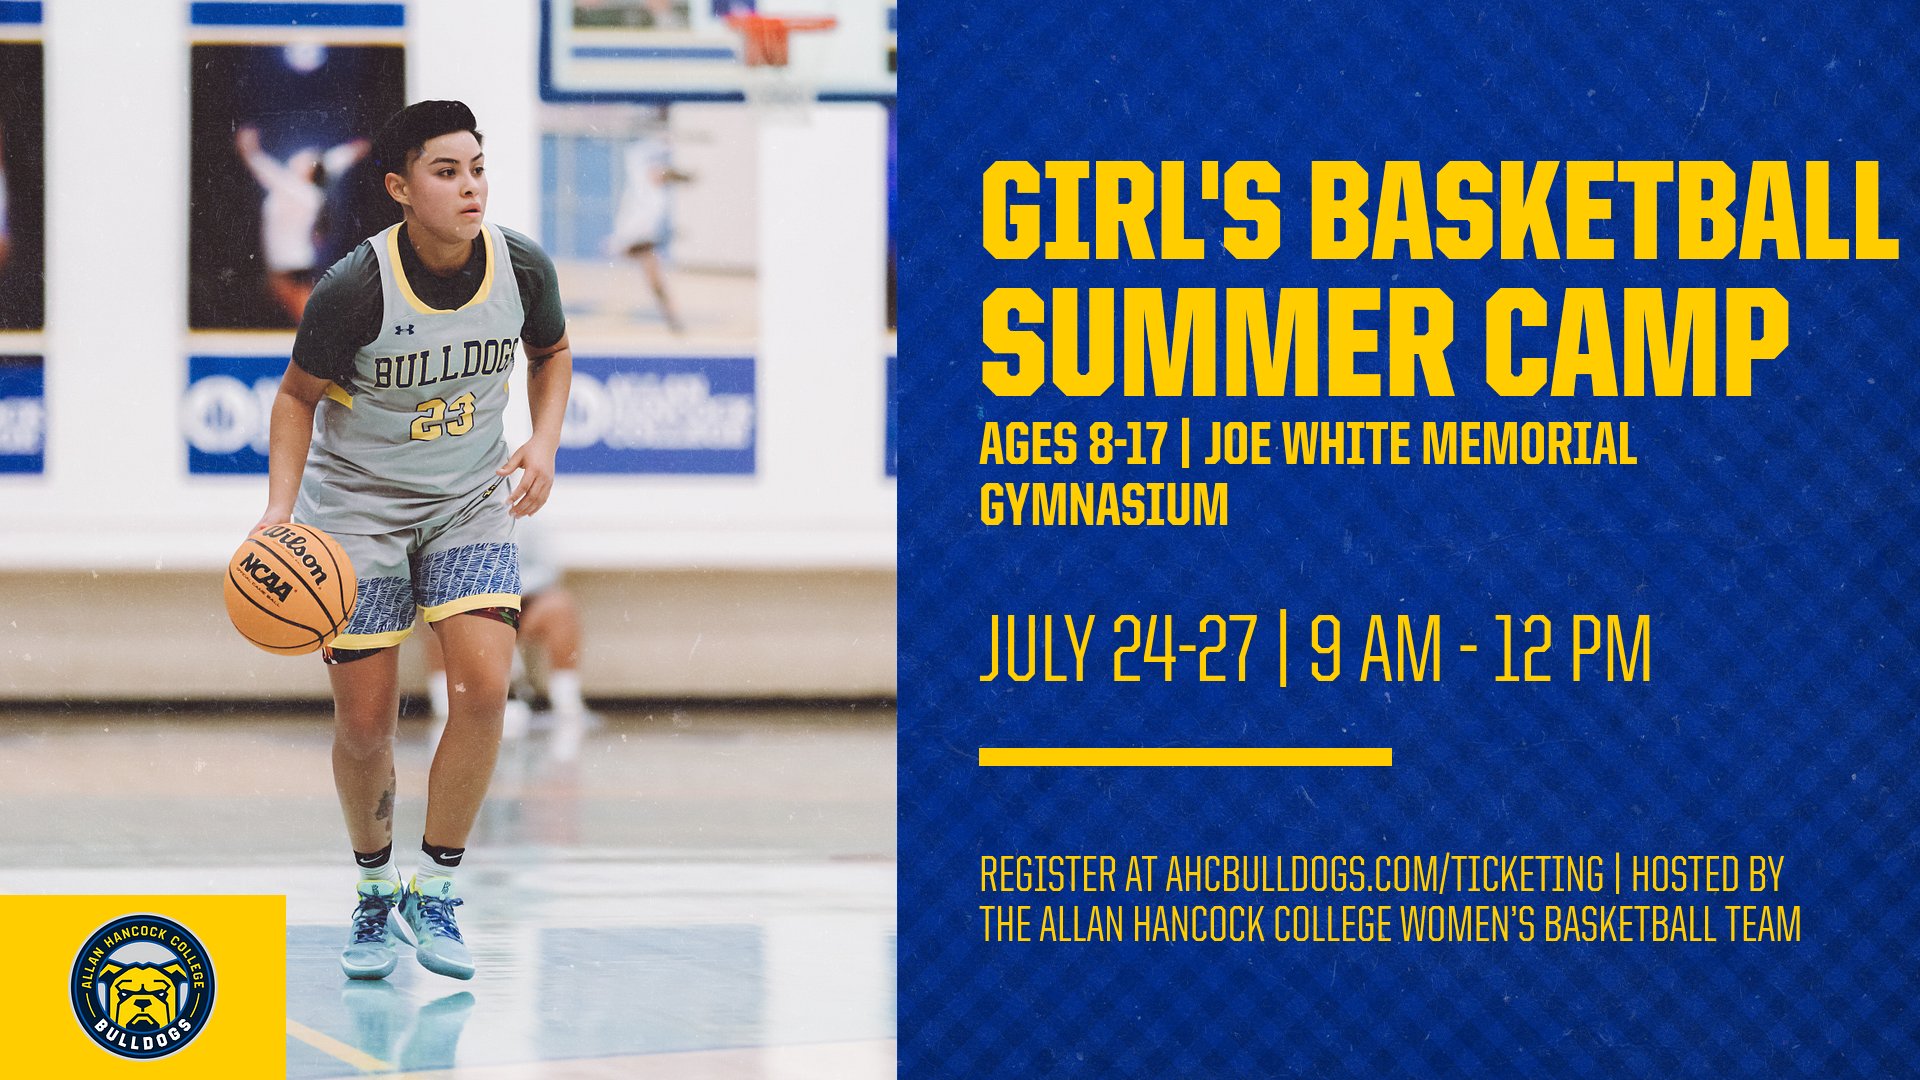 Women's Basketball Announces Girl's Youth Summer Camp Dates